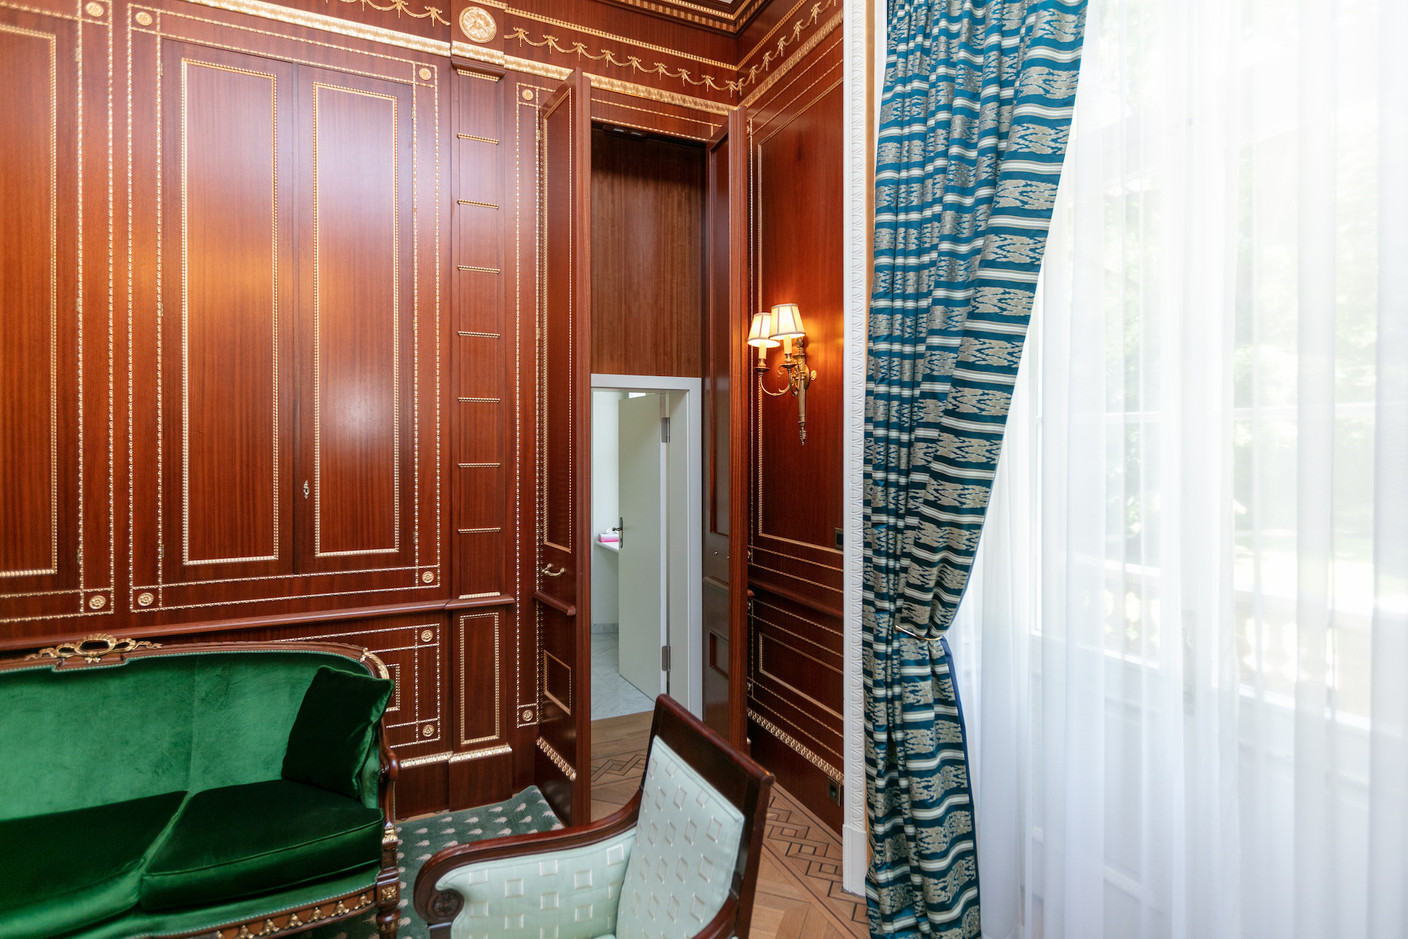 A hidden door in the panelling of the “president's room” gives way to a small toilet Romain Gamba/Maison Moderne